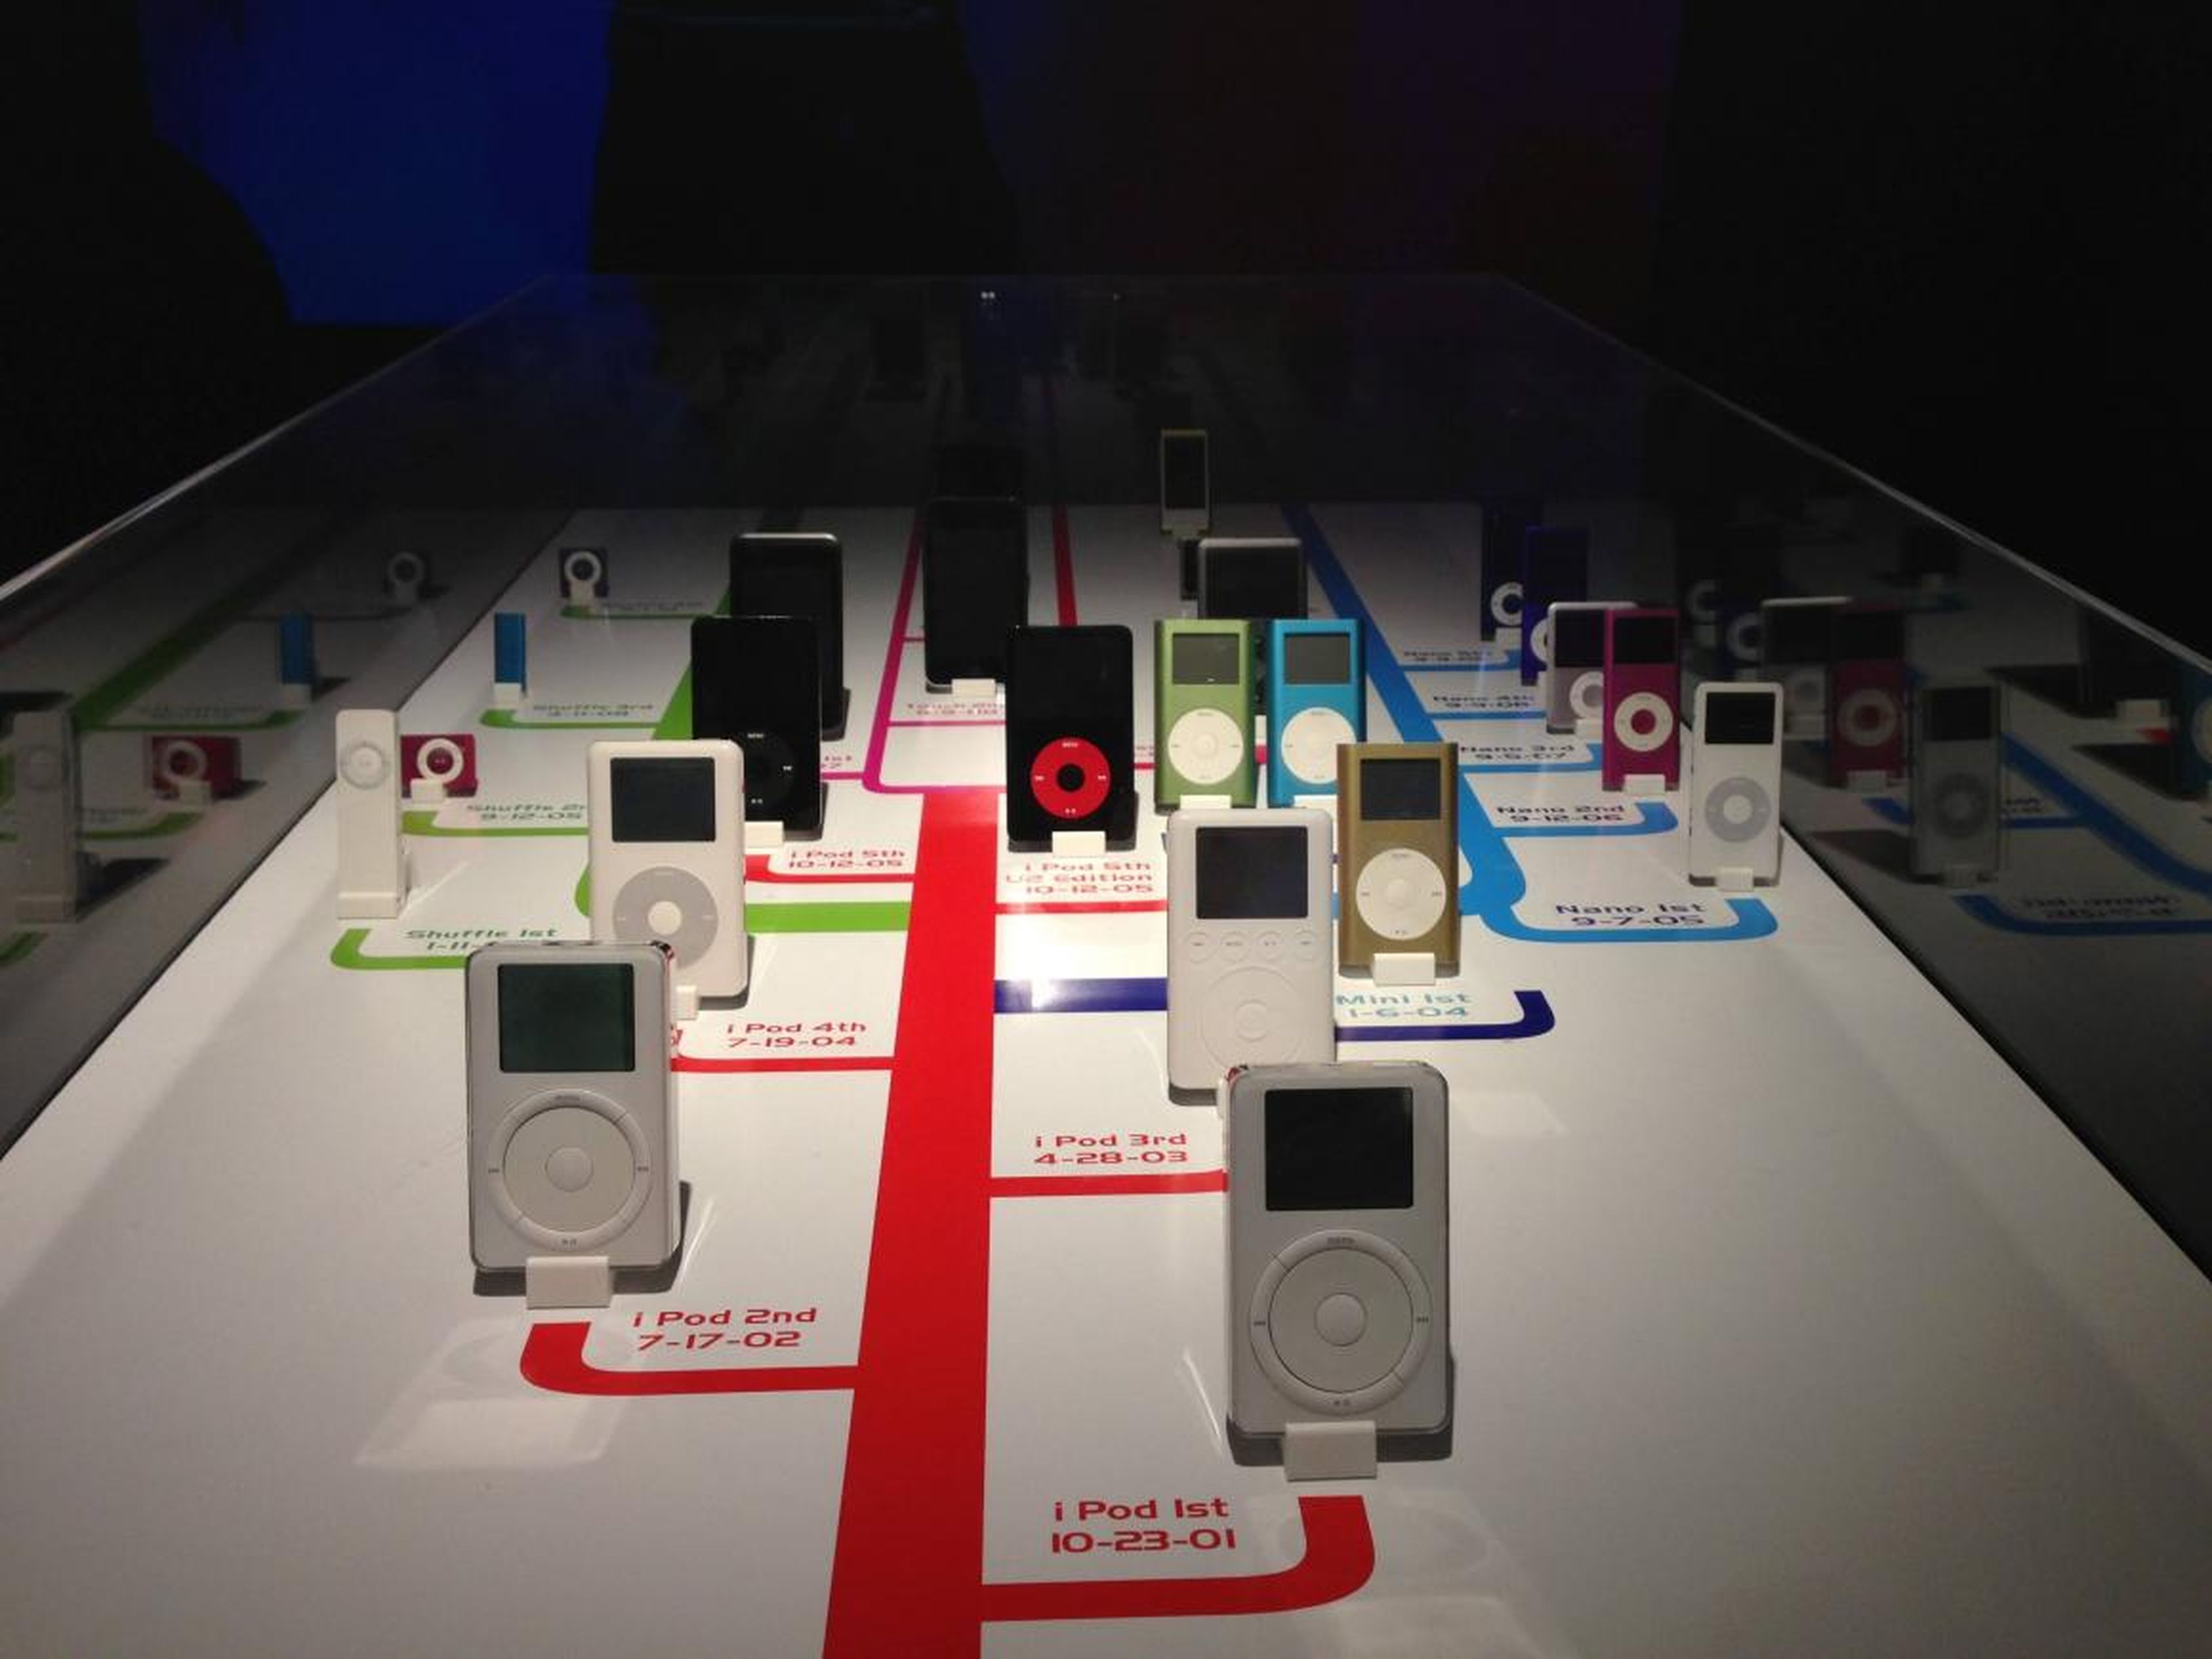 The iPod lineup slowly grew, too. By 2005, there was the iPod, the iPod Mini, the iPad Nano, and the iPod Shuffle, in descending size order. That same year also saw the introduction of the first iPod with video, alongside the